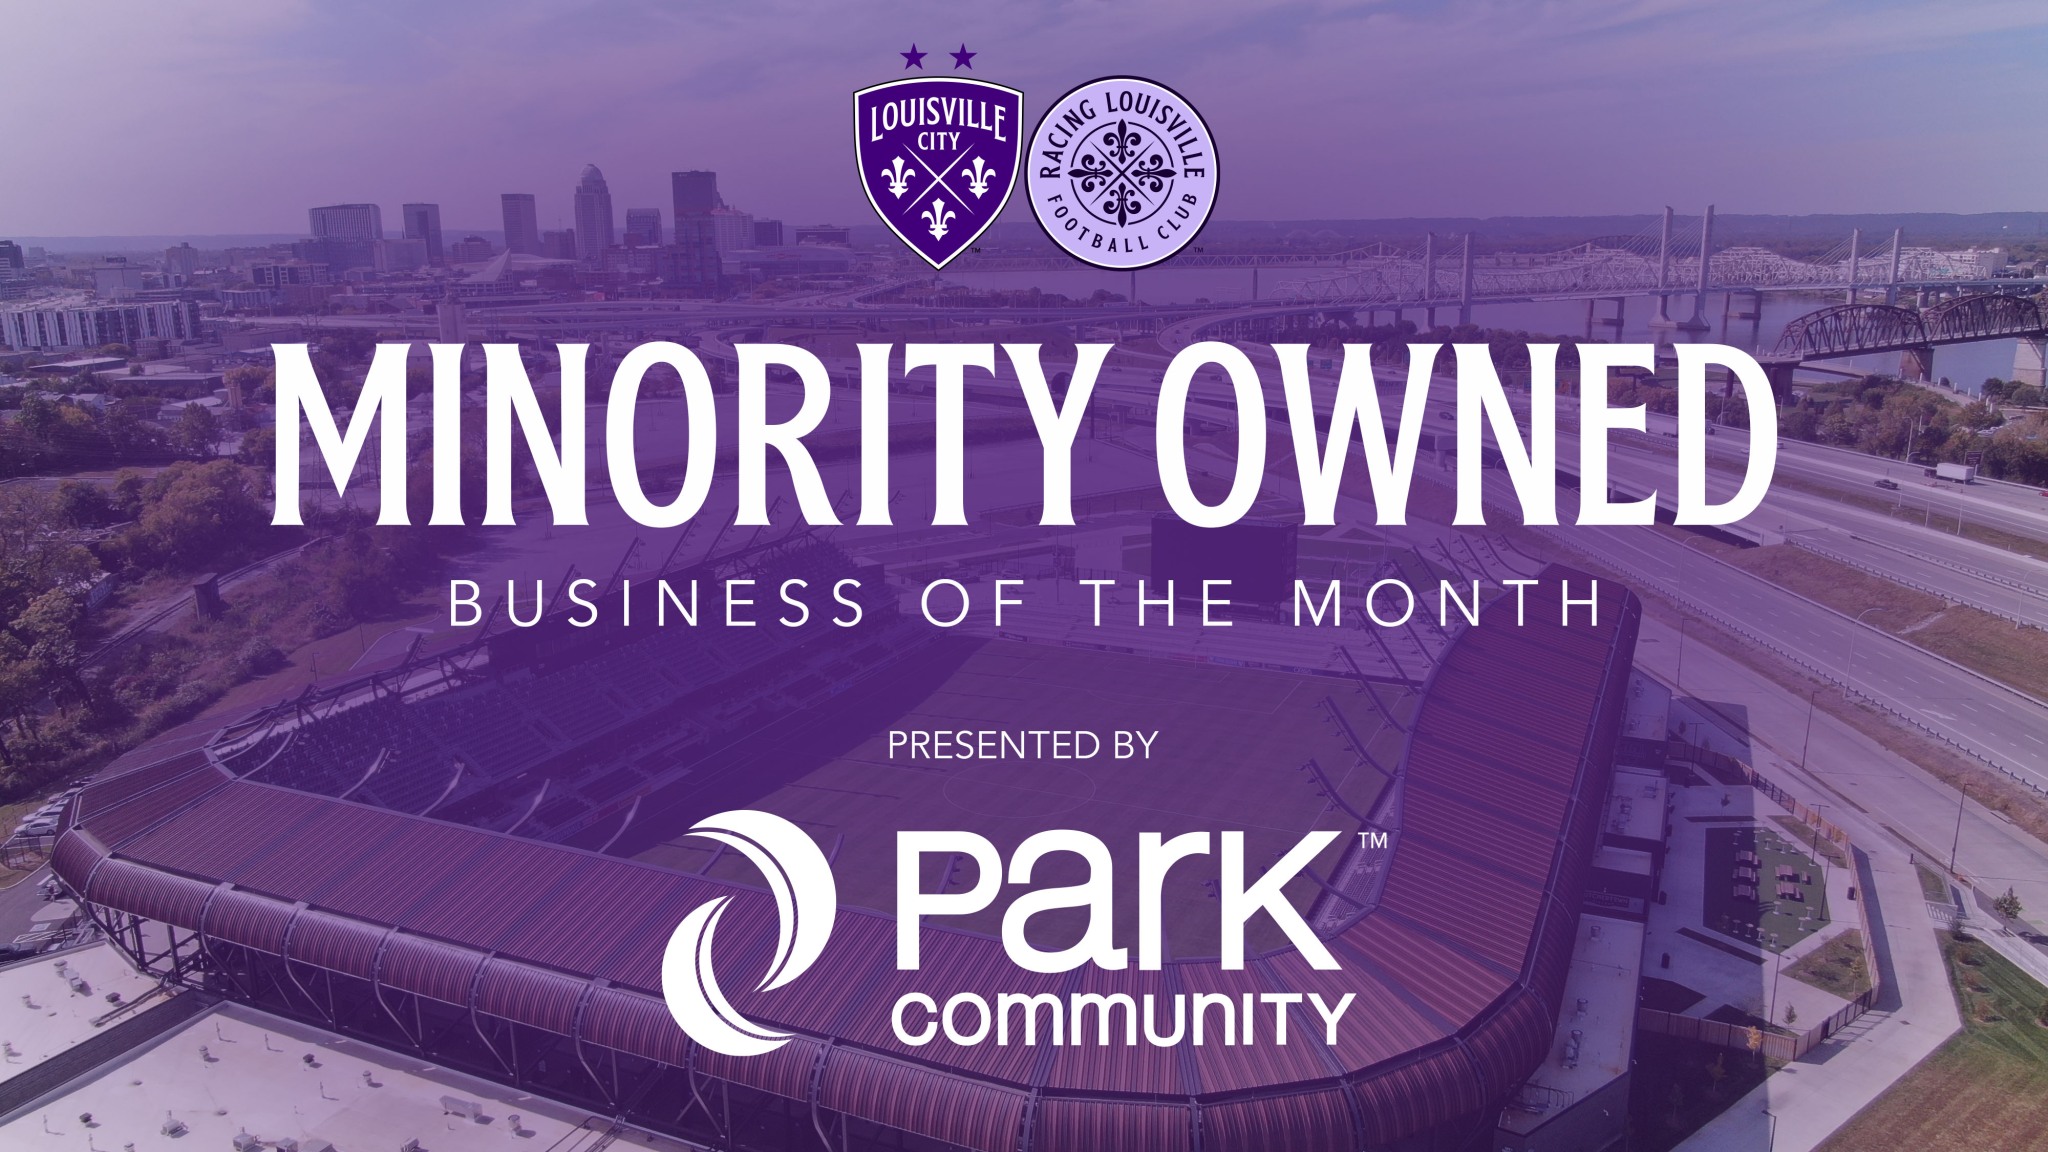 LOU CITY Minority Owned Business of the Month